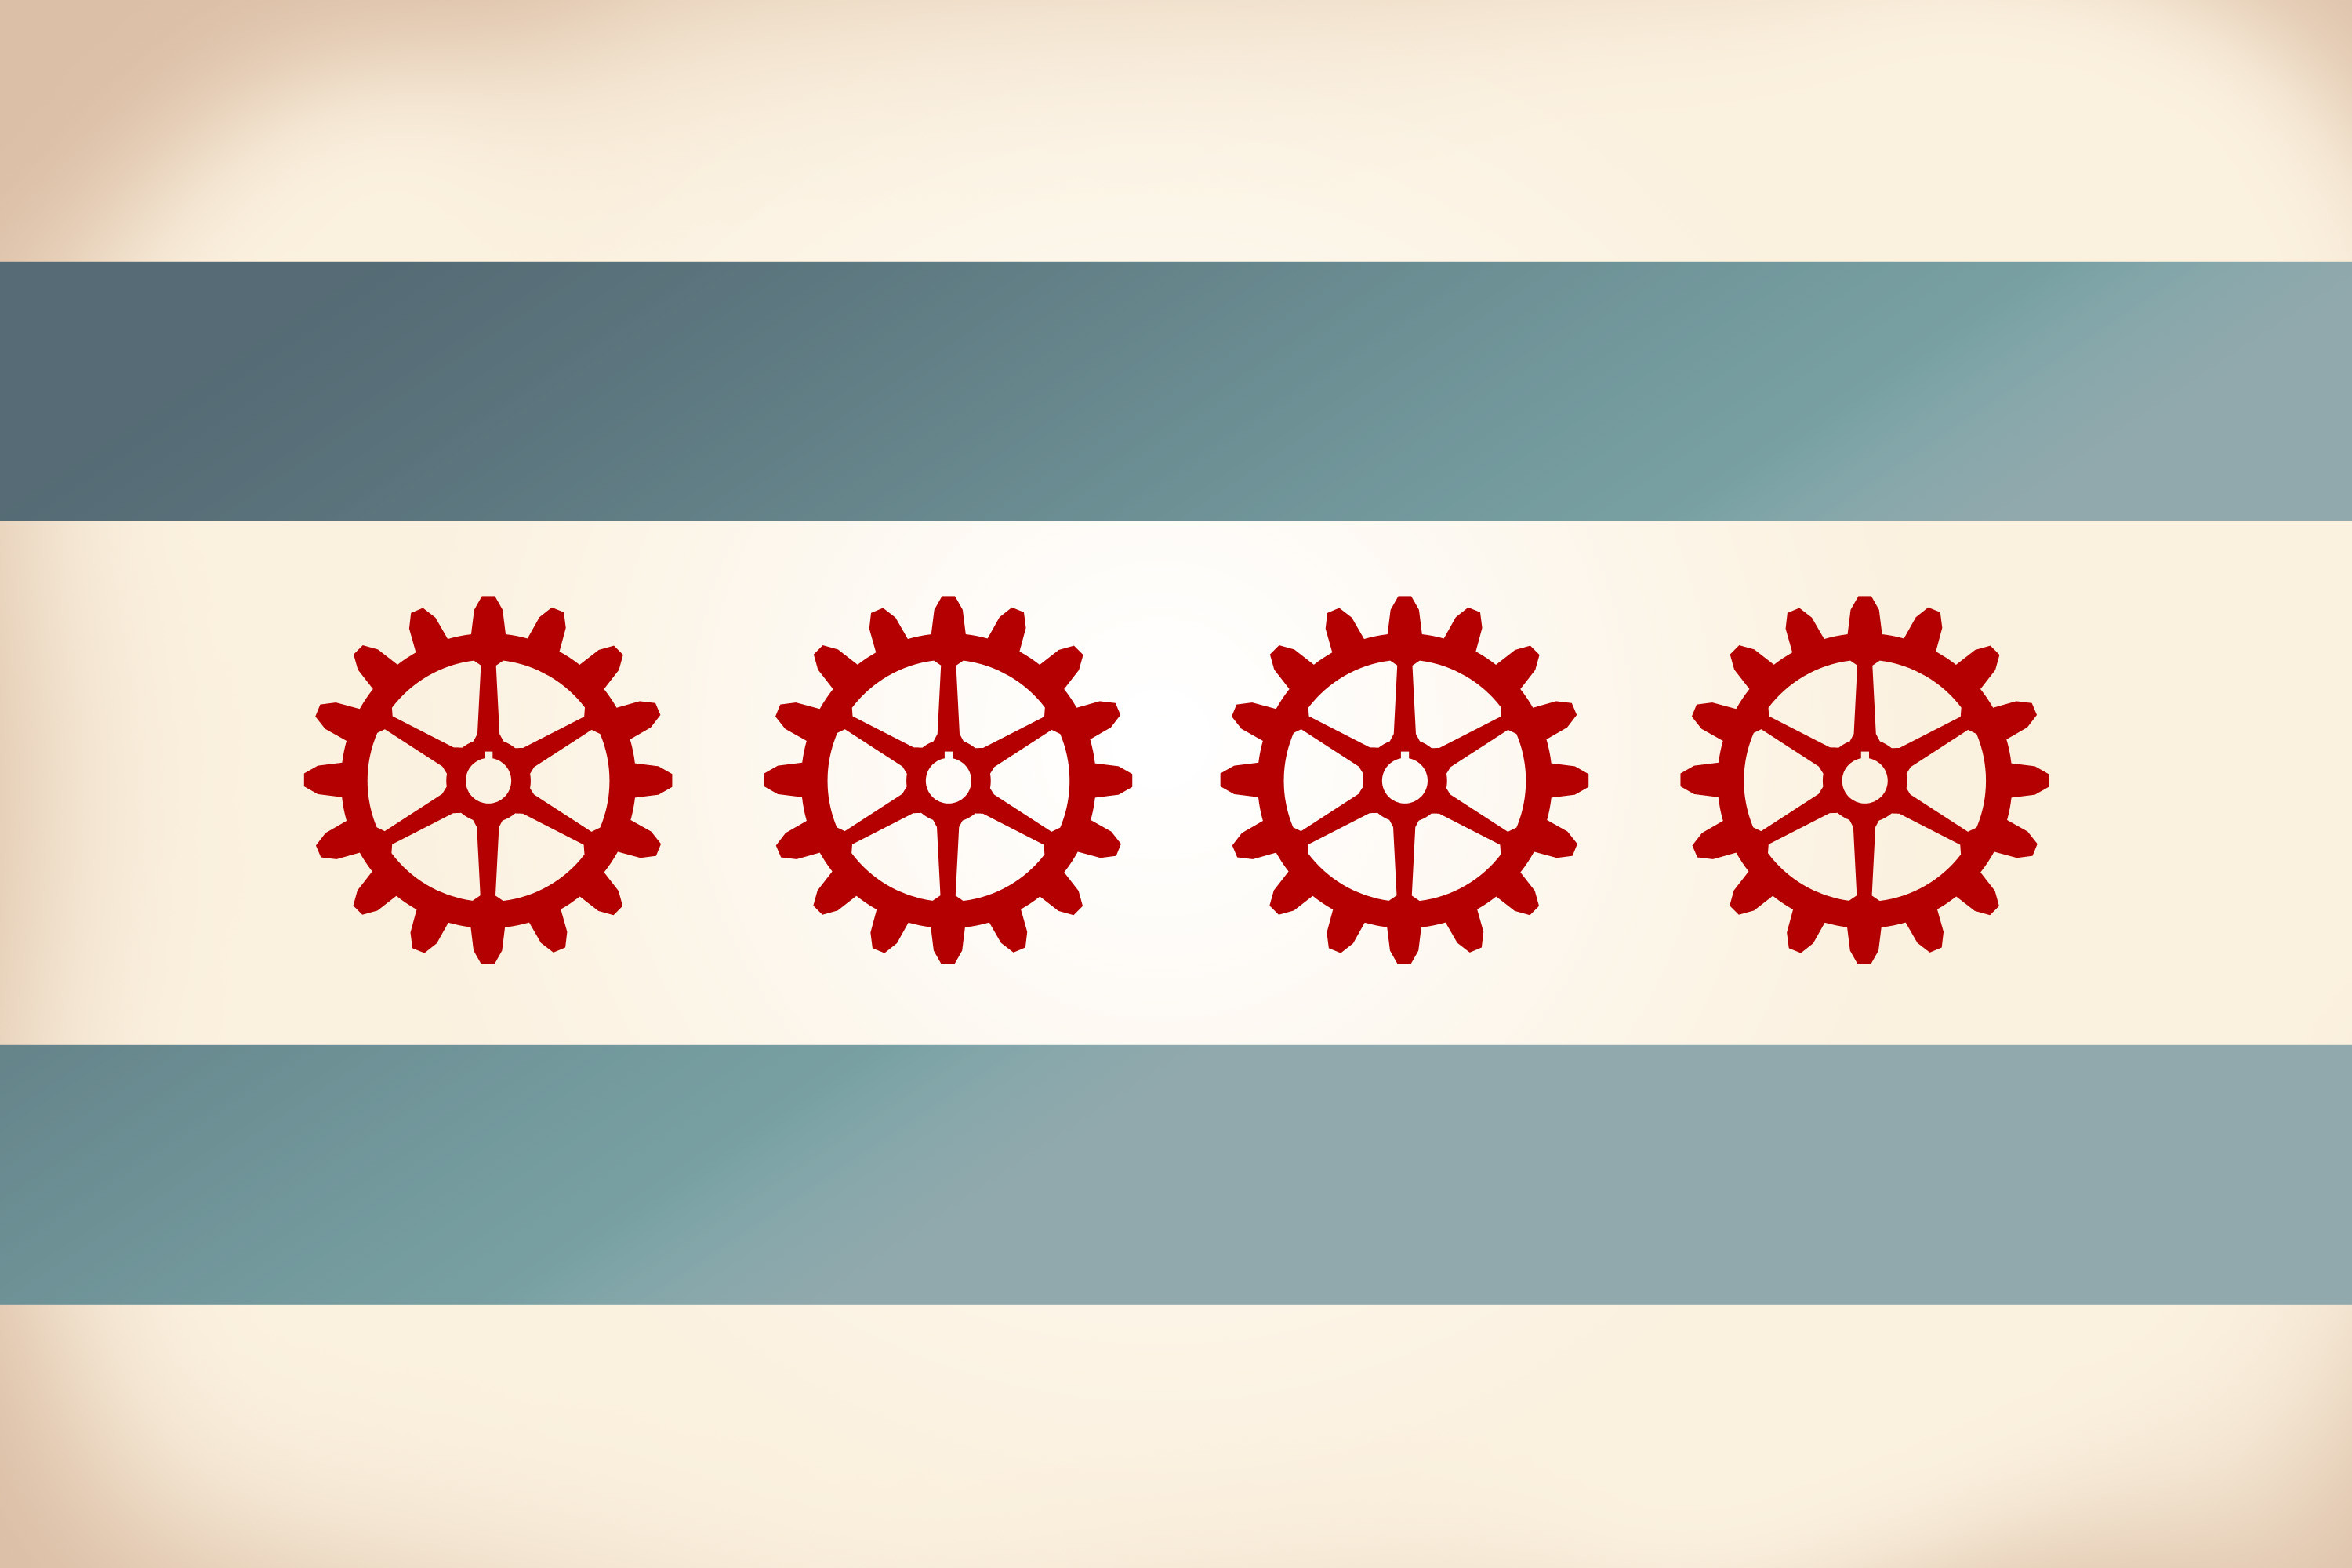 6749 Chicago Flag Images Stock Photos  Vectors  Shutterstock